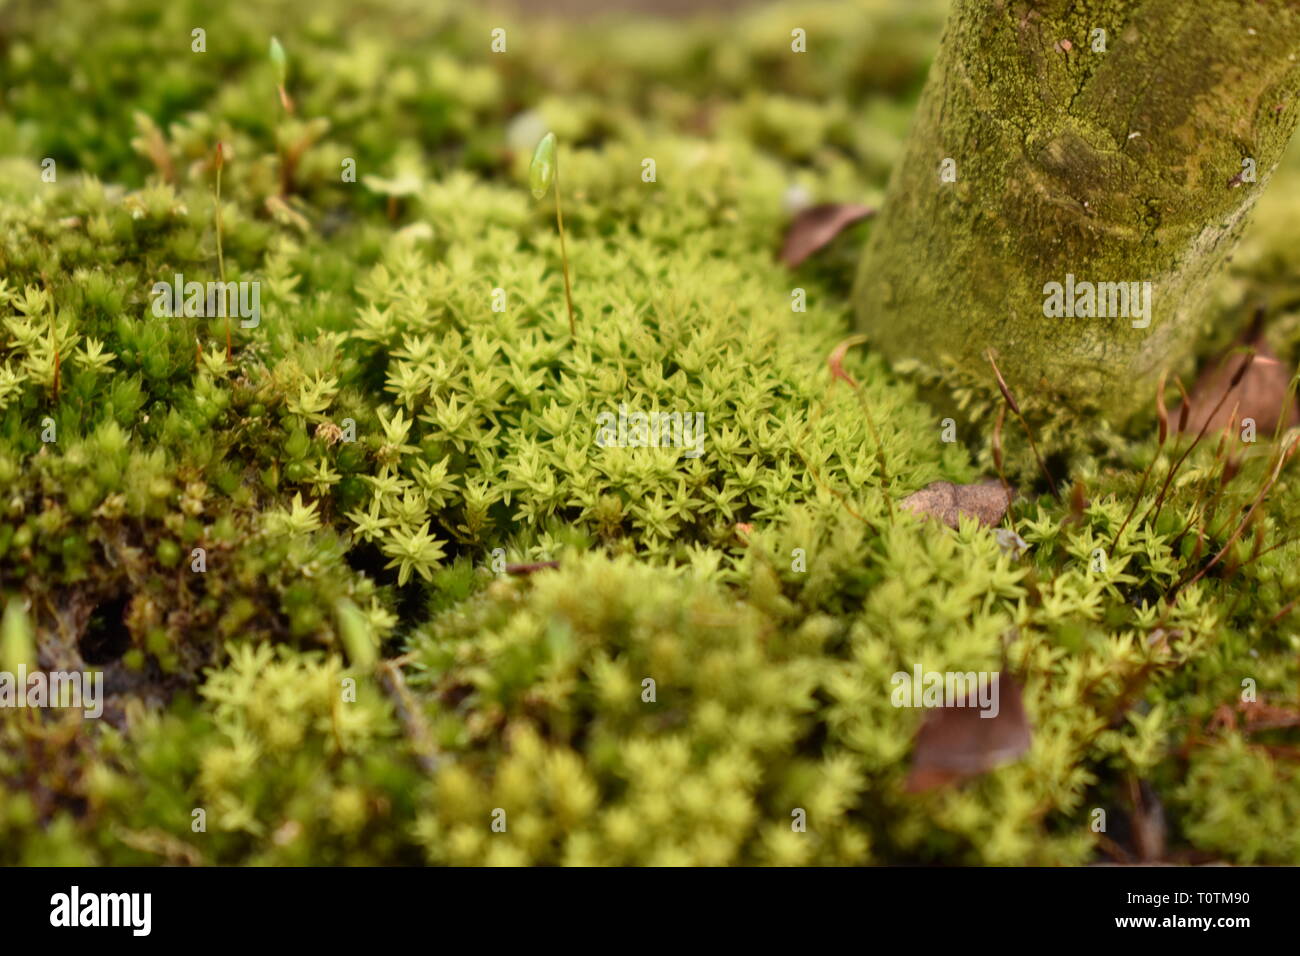 A close up photo of moss growing at the base of a bonsai tree. Stock Photo